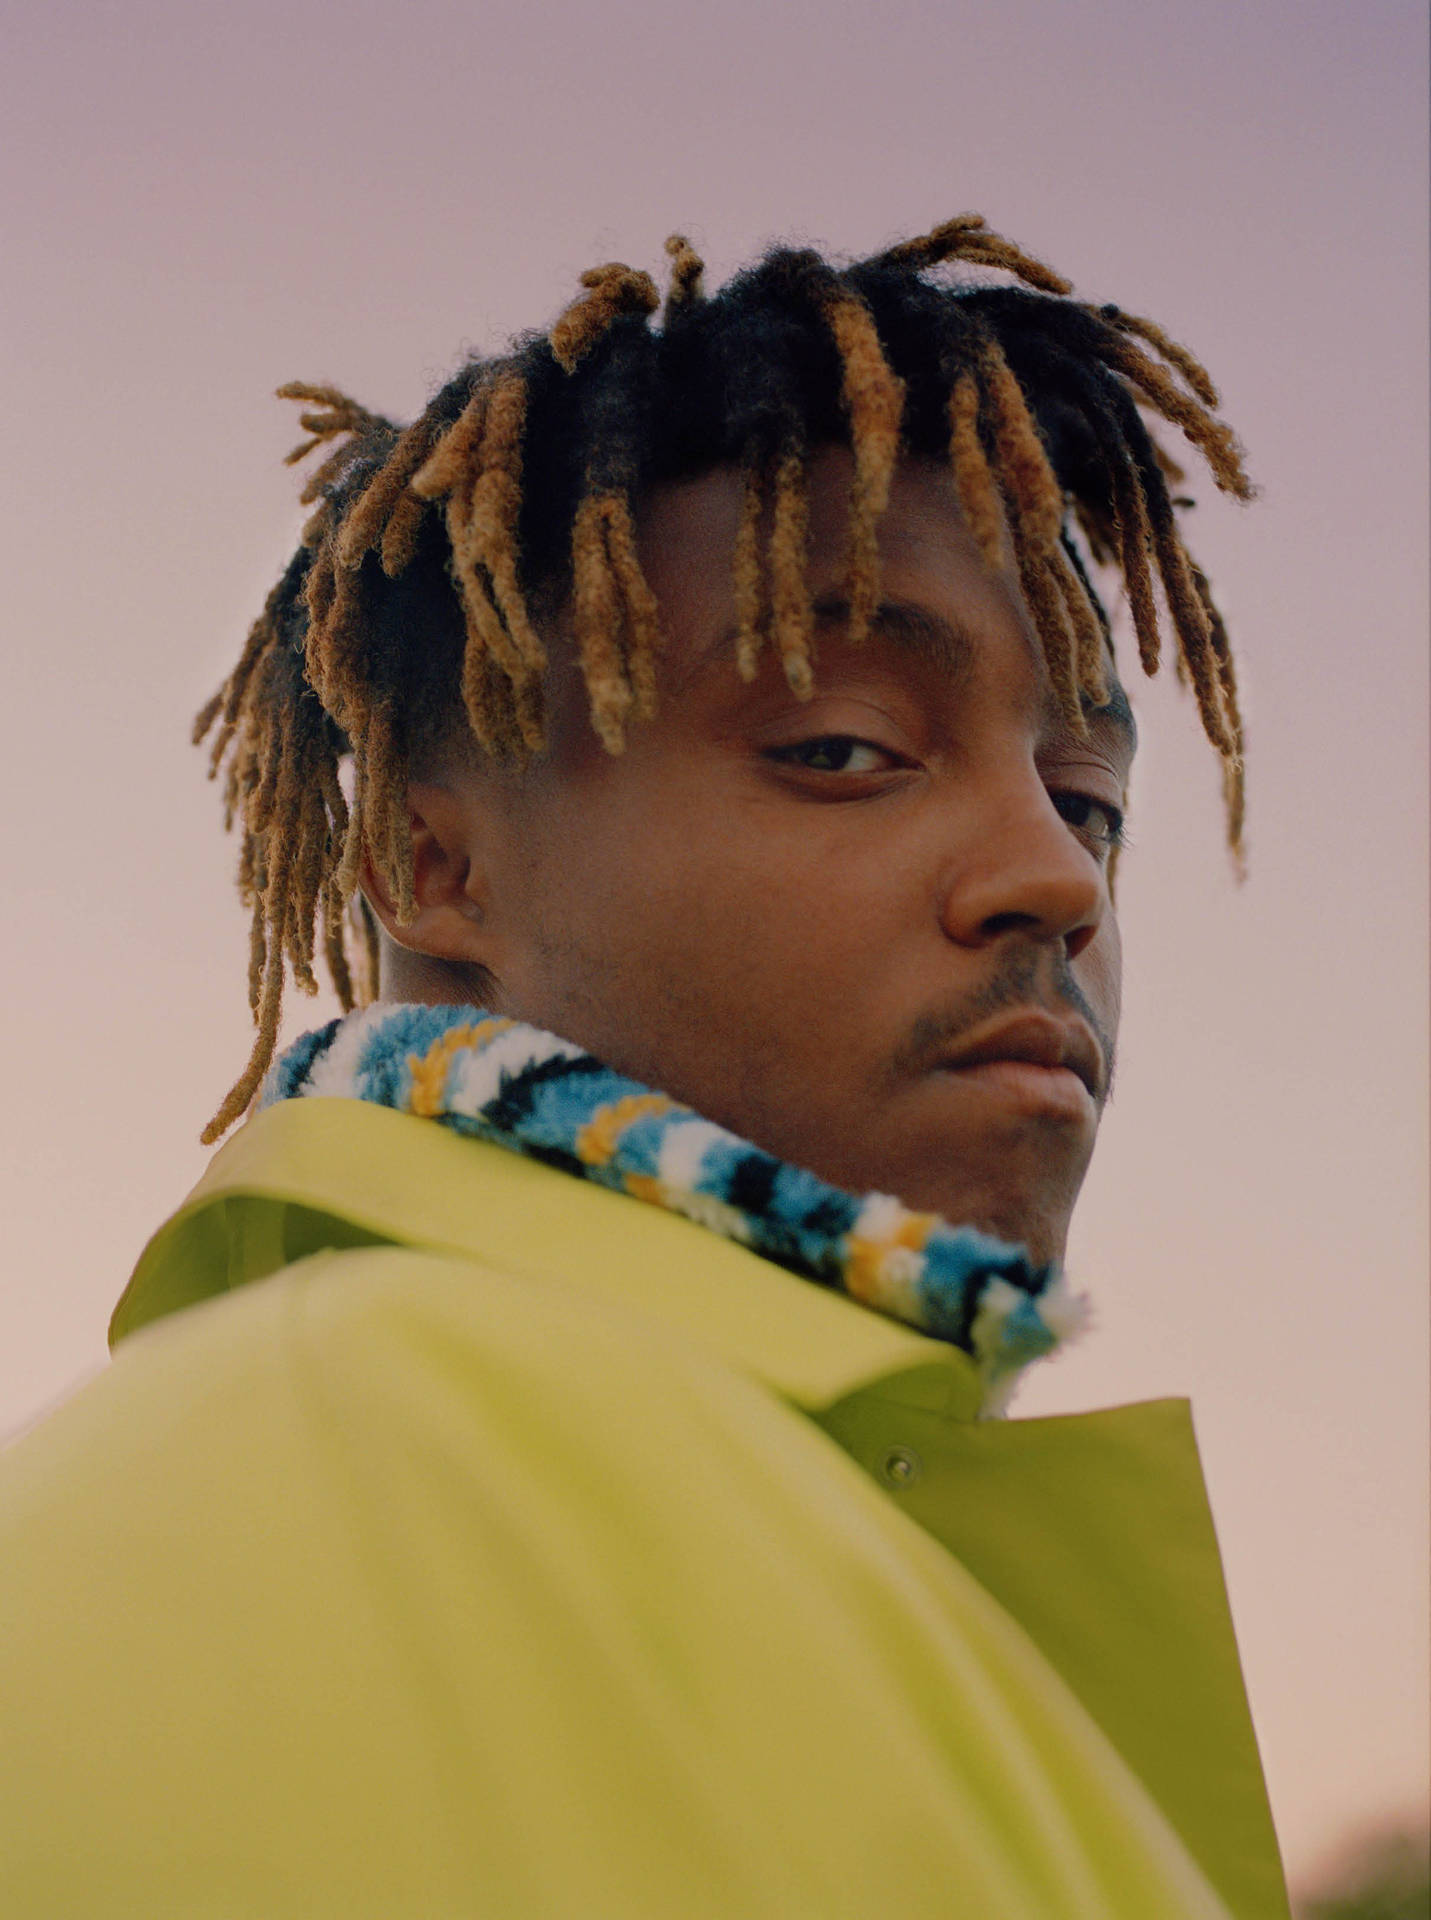 Caption: A Moment Immortalized, Juice Wrld In Thought Wallpaper